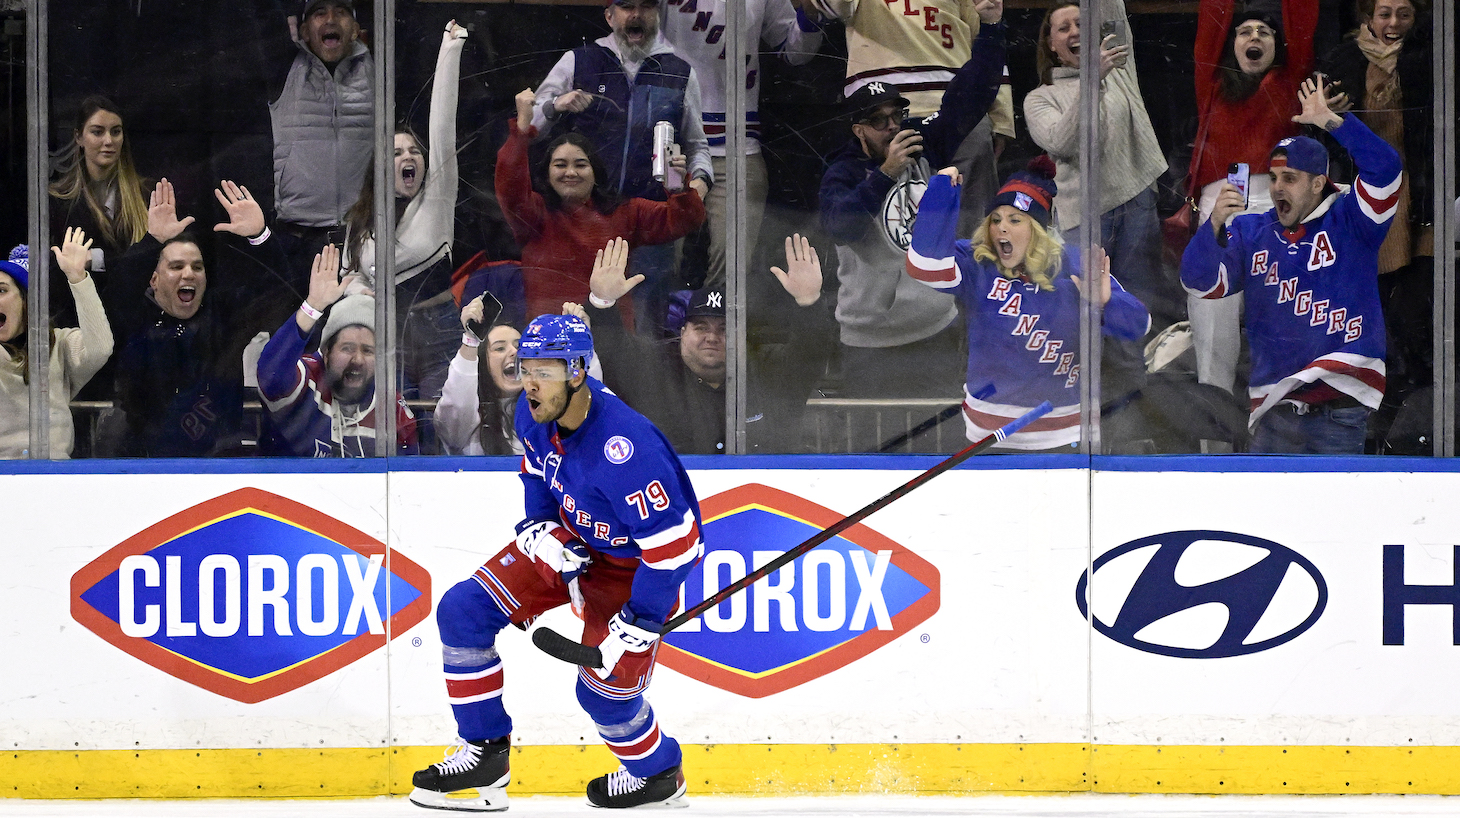 NEW YORK, NEW YORK - FEBRUARY 15: K'Andre Miller #79 of the New York Rangers celebrates after scoring the game-winning shootout goal against the Boston Bruins at Madison Square Garden on February 15, 2022 in New York City. (Photo by Steven Ryan/Getty Images)